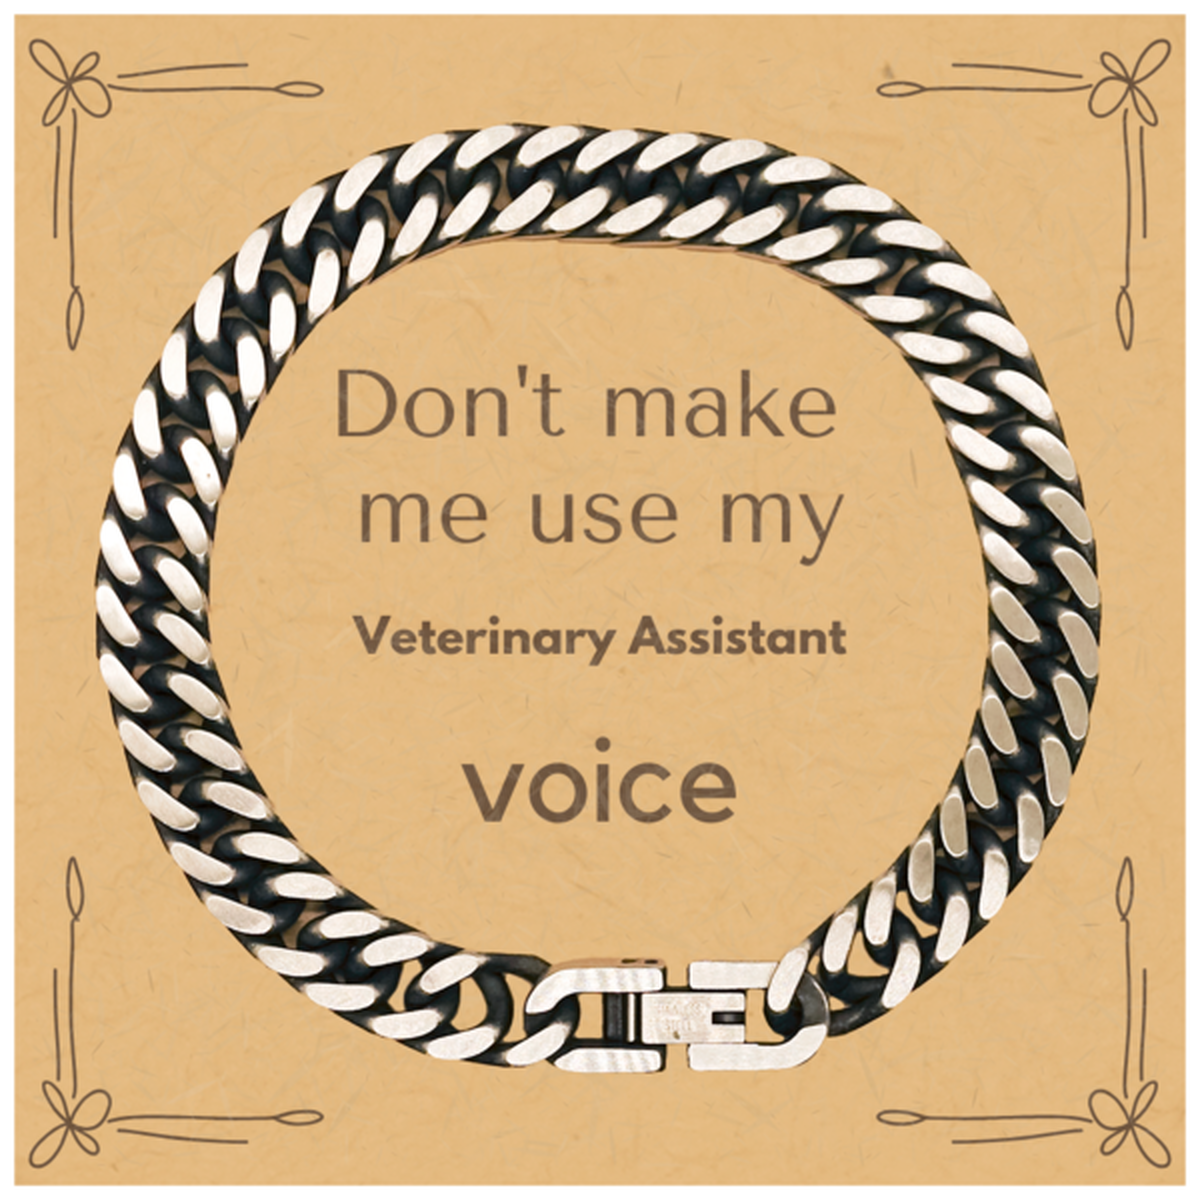 Don't make me use my Veterinary Assistant voice, Sarcasm Veterinary Assistant Card Gifts, Christmas Veterinary Assistant Cuban Link Chain Bracelet Birthday Unique Gifts For Veterinary Assistant Coworkers, Men, Women, Colleague, Friends